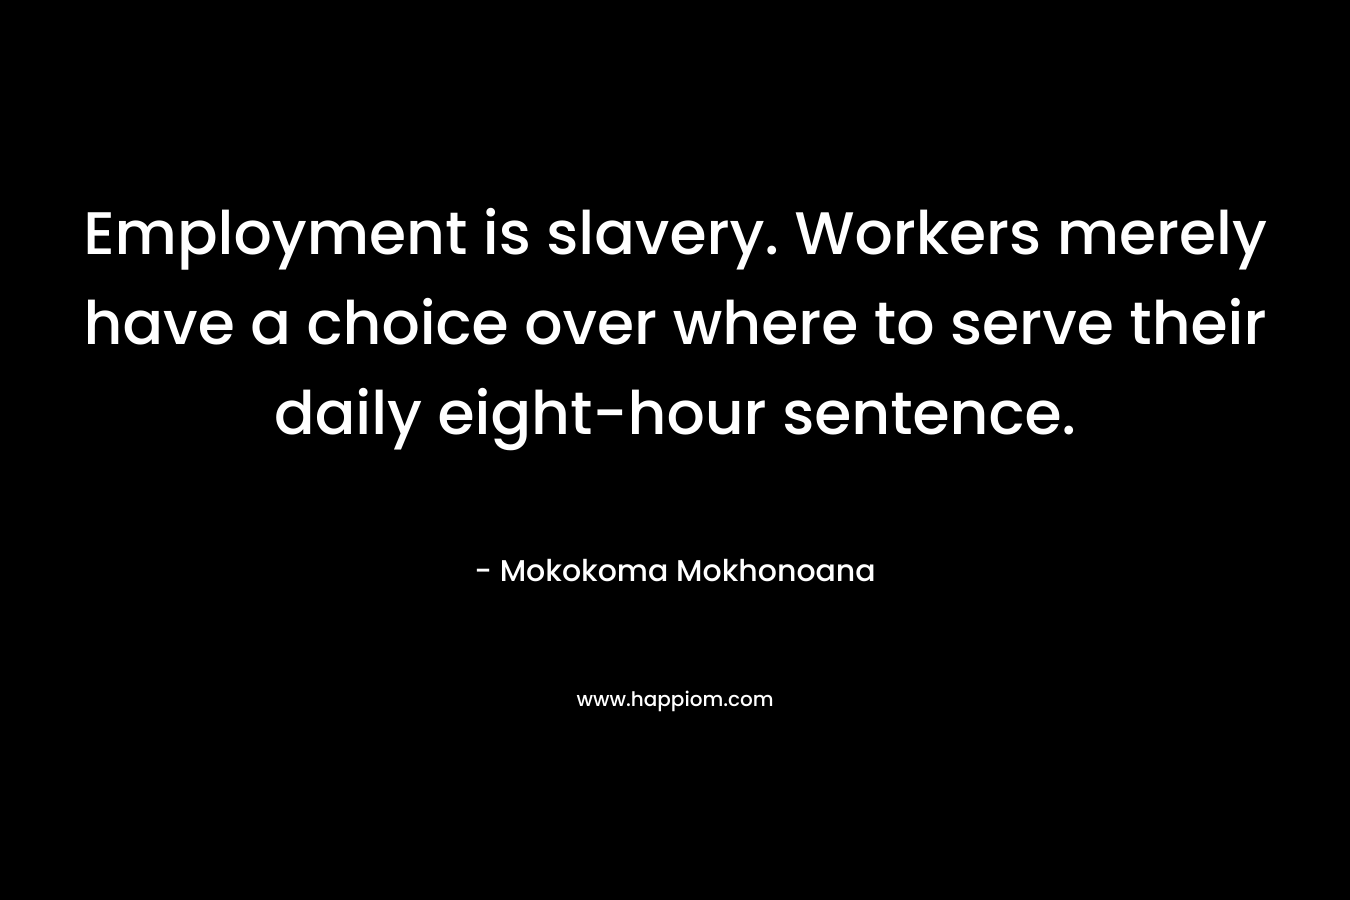 Employment is slavery. Workers merely have a choice over where to serve their daily eight-hour sentence.